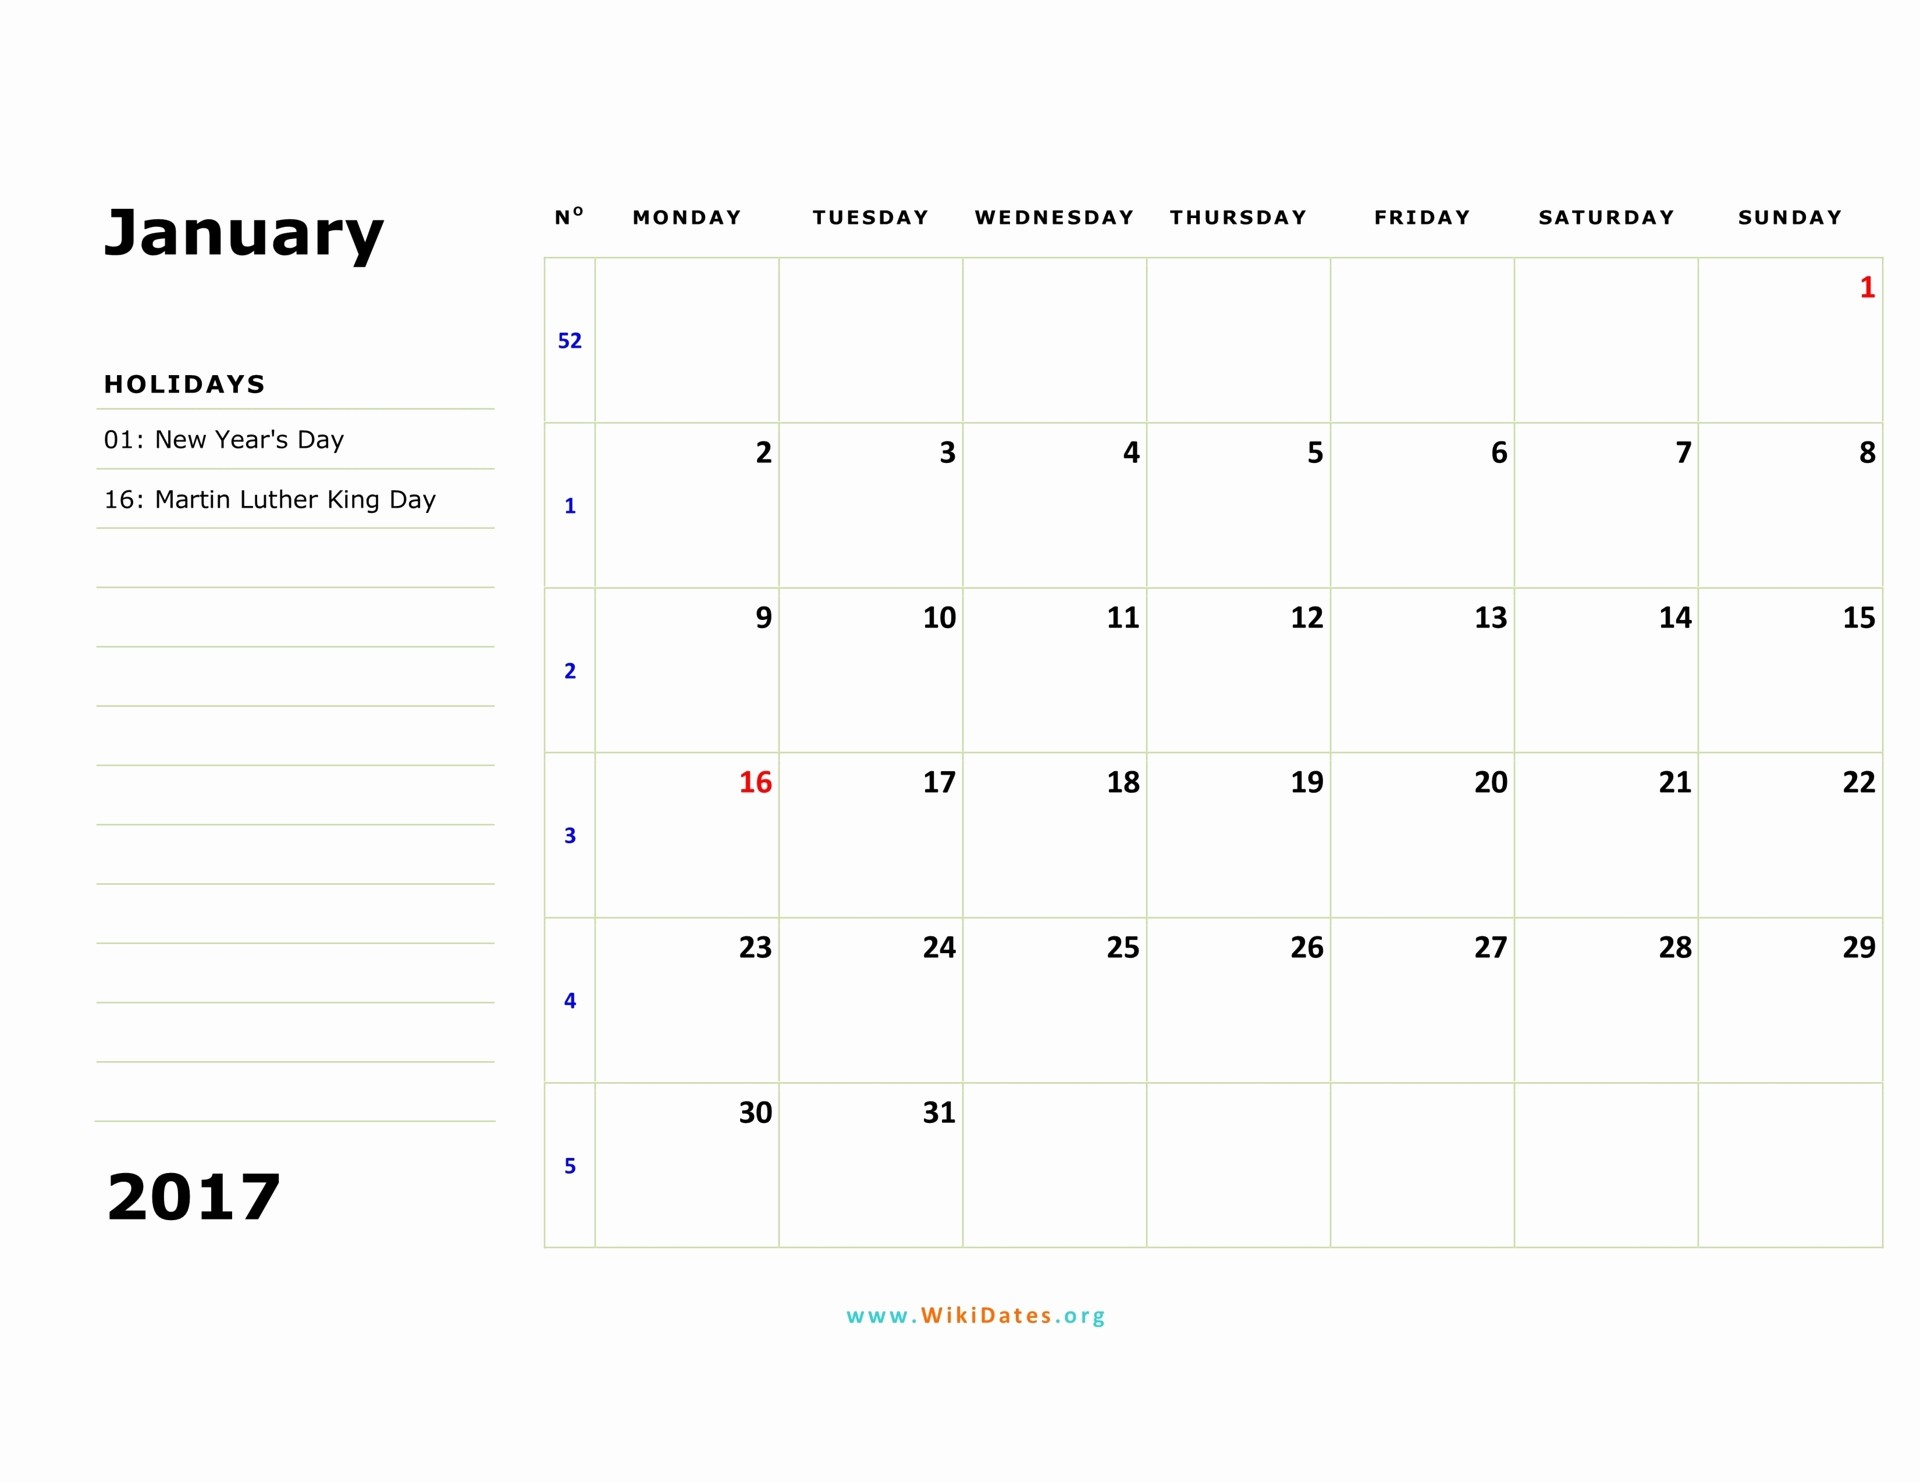 2017 Calendar Month by Month Awesome 2017 Calendar